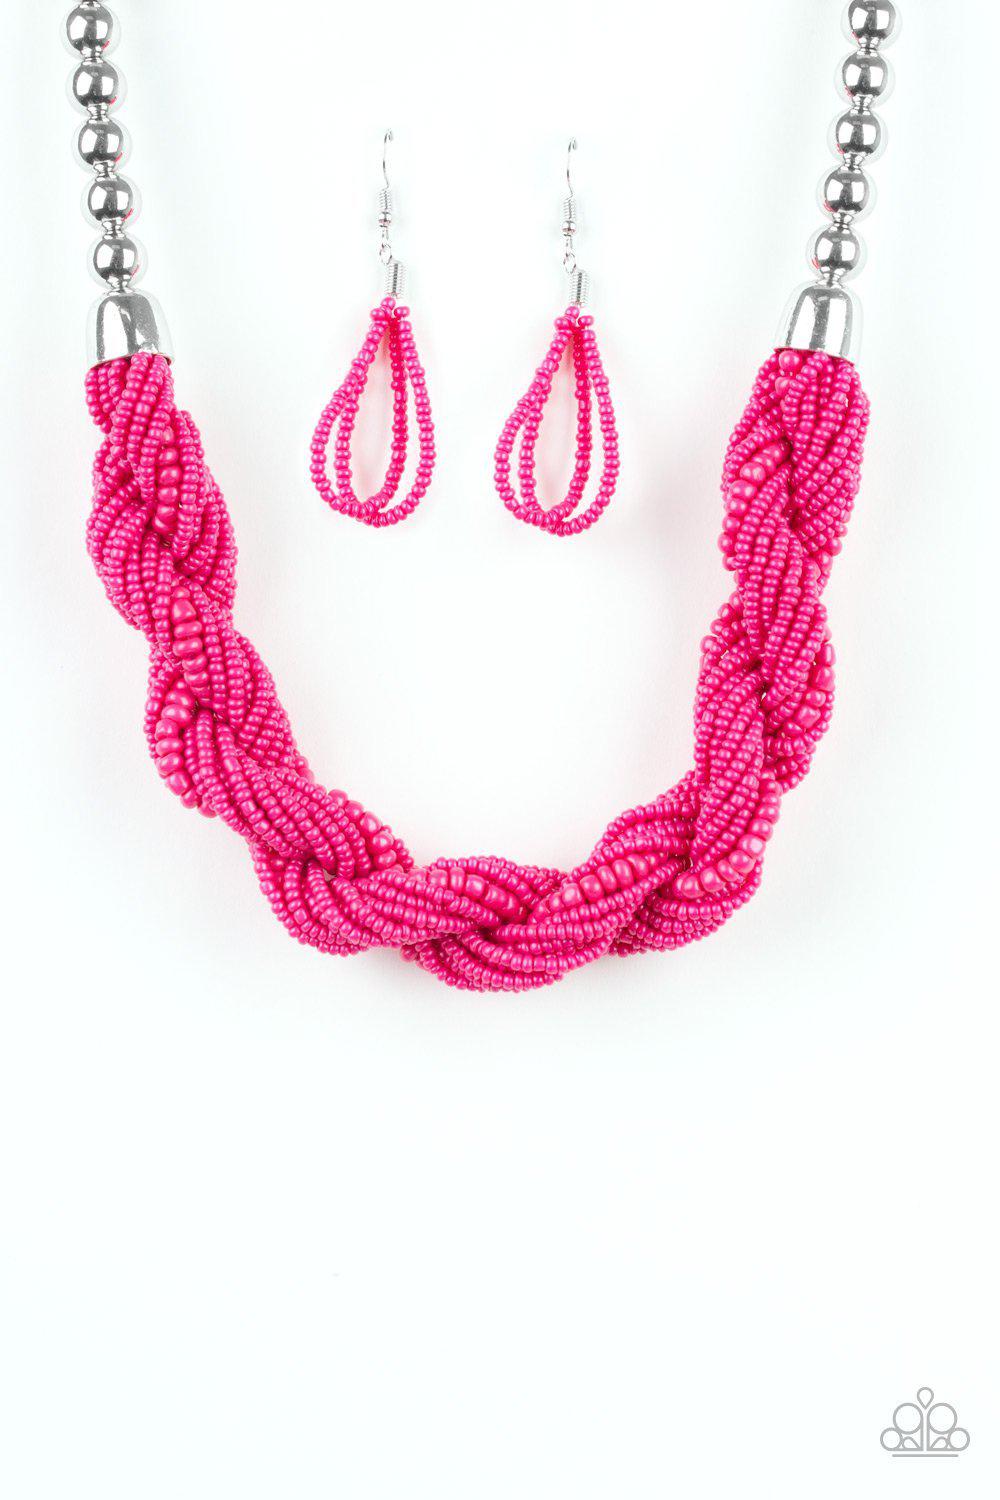 Savannah Surfin Pink Seed Bead Necklace - Paparazzi Accessories-CarasShop.com - $5 Jewelry by Cara Jewels